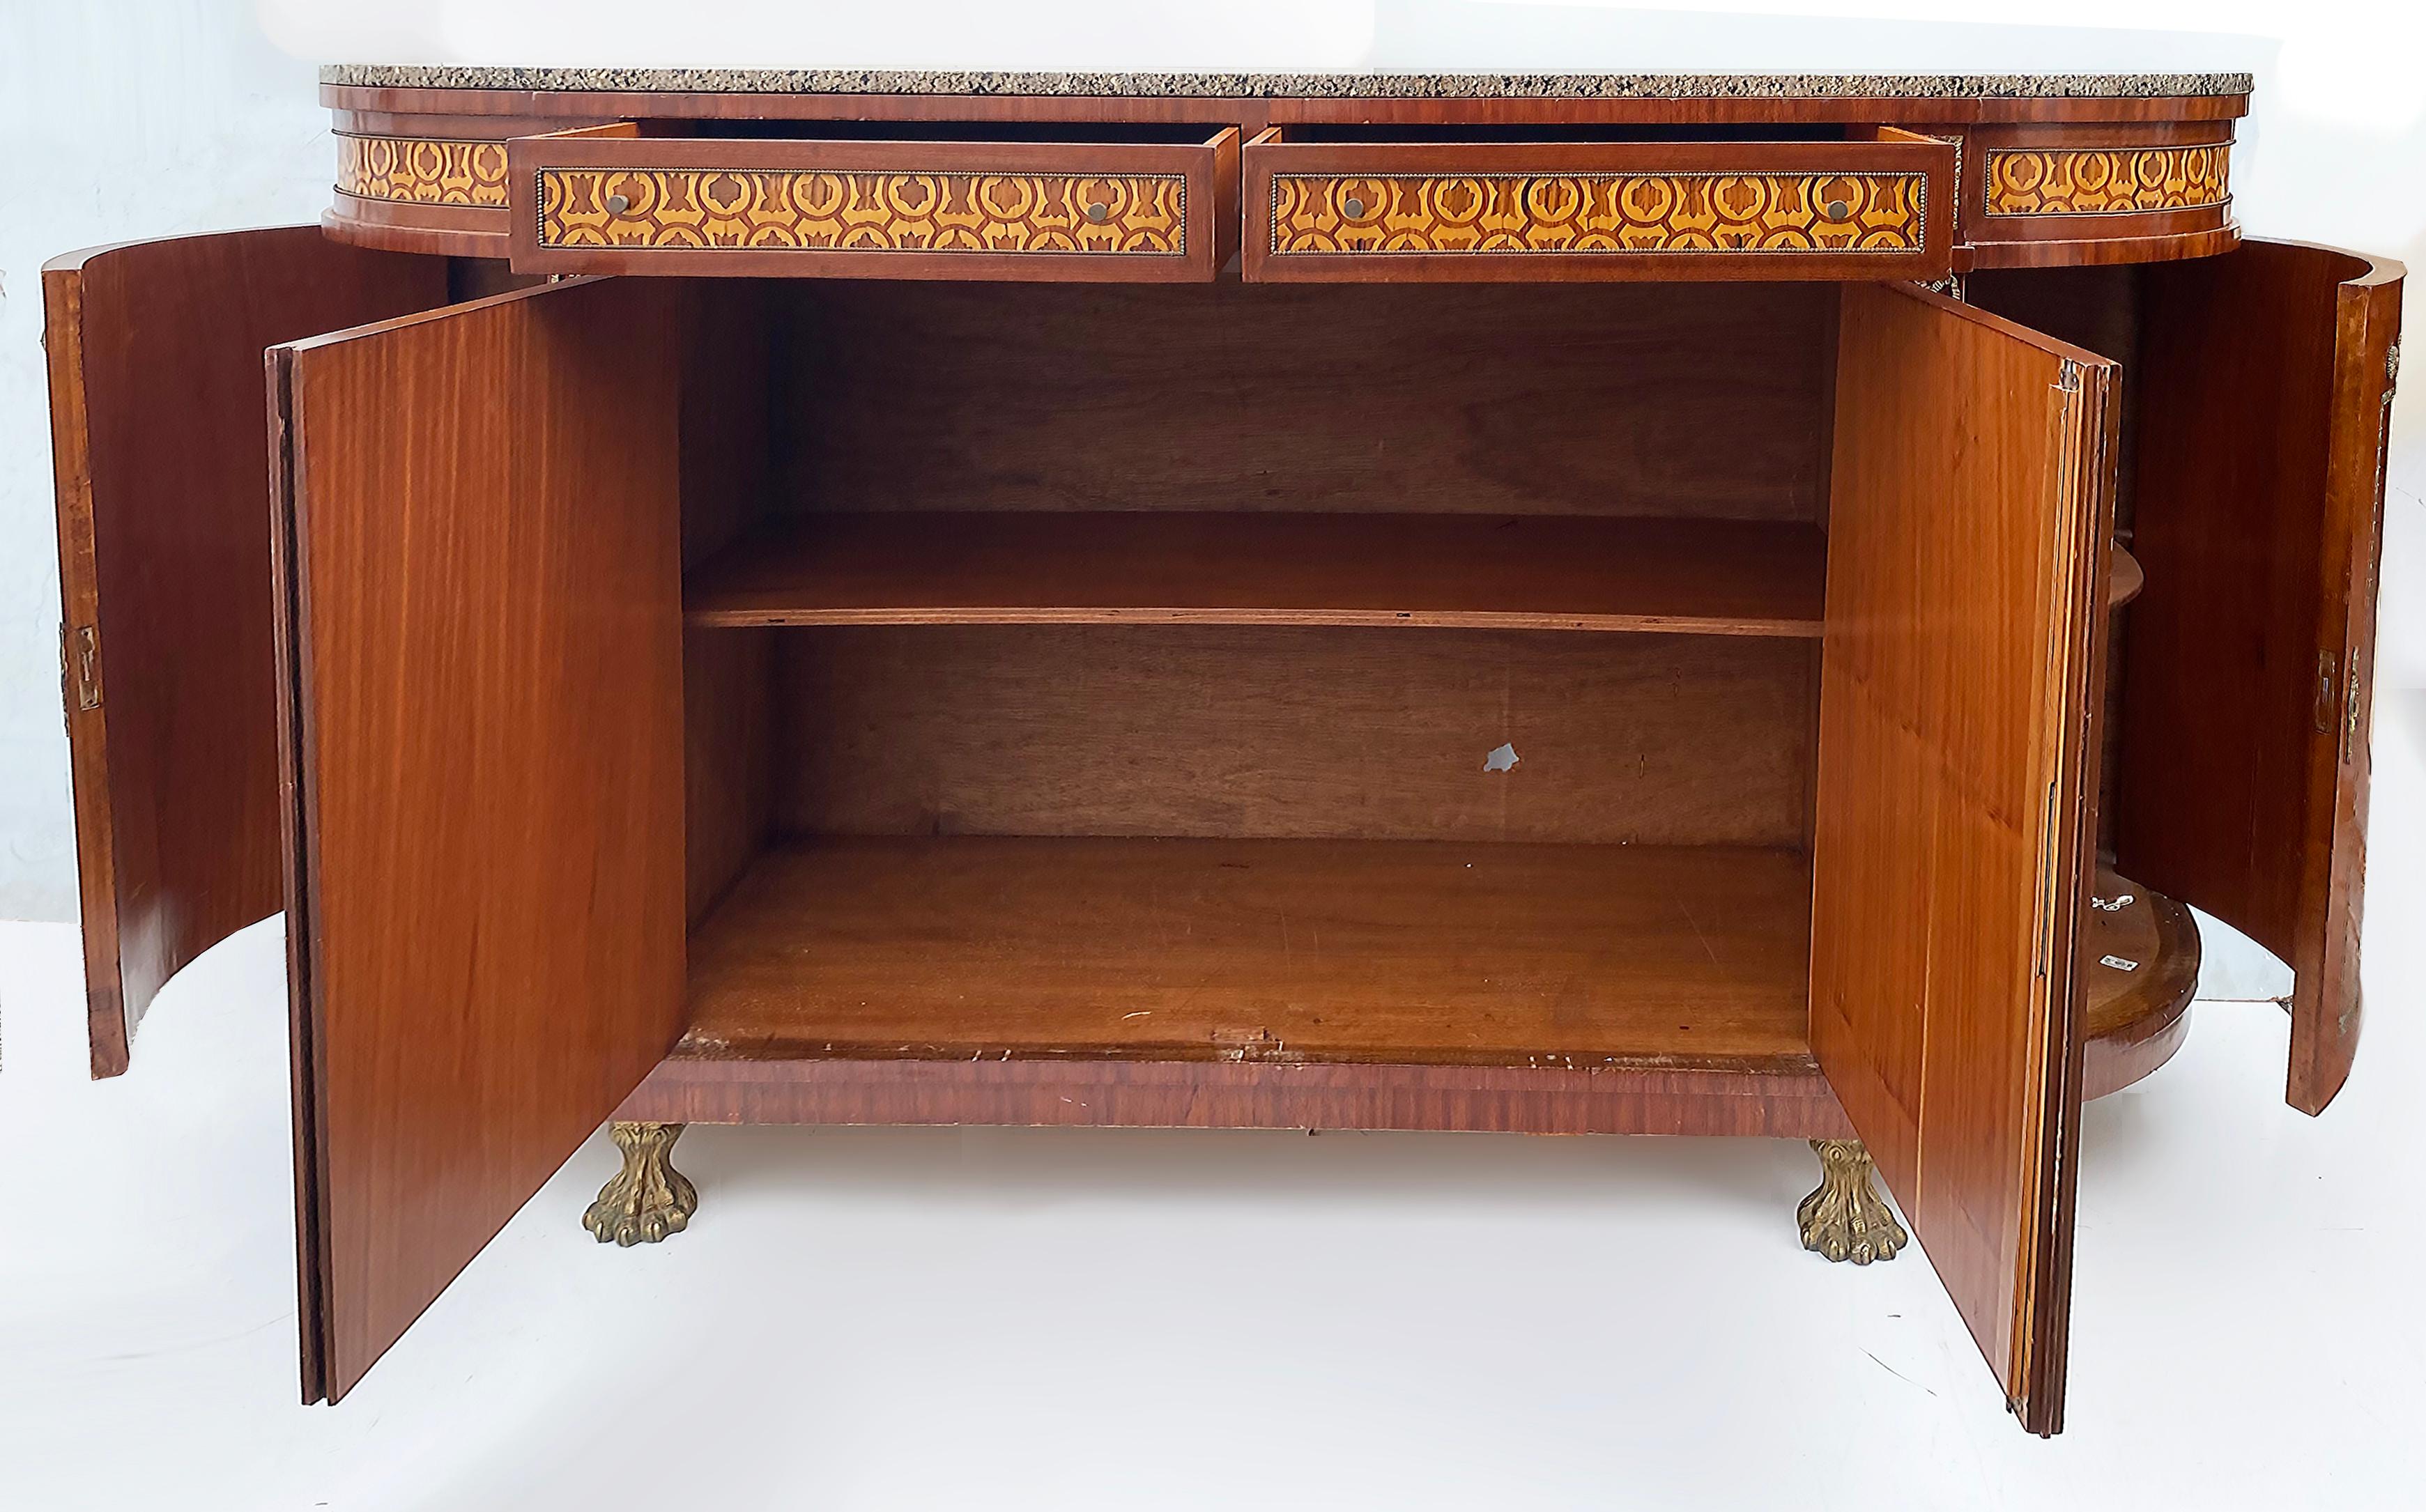 20th Century Marquetry Sideboard French, Granite, Inlay, Bronze Mounts and Feet For Sale